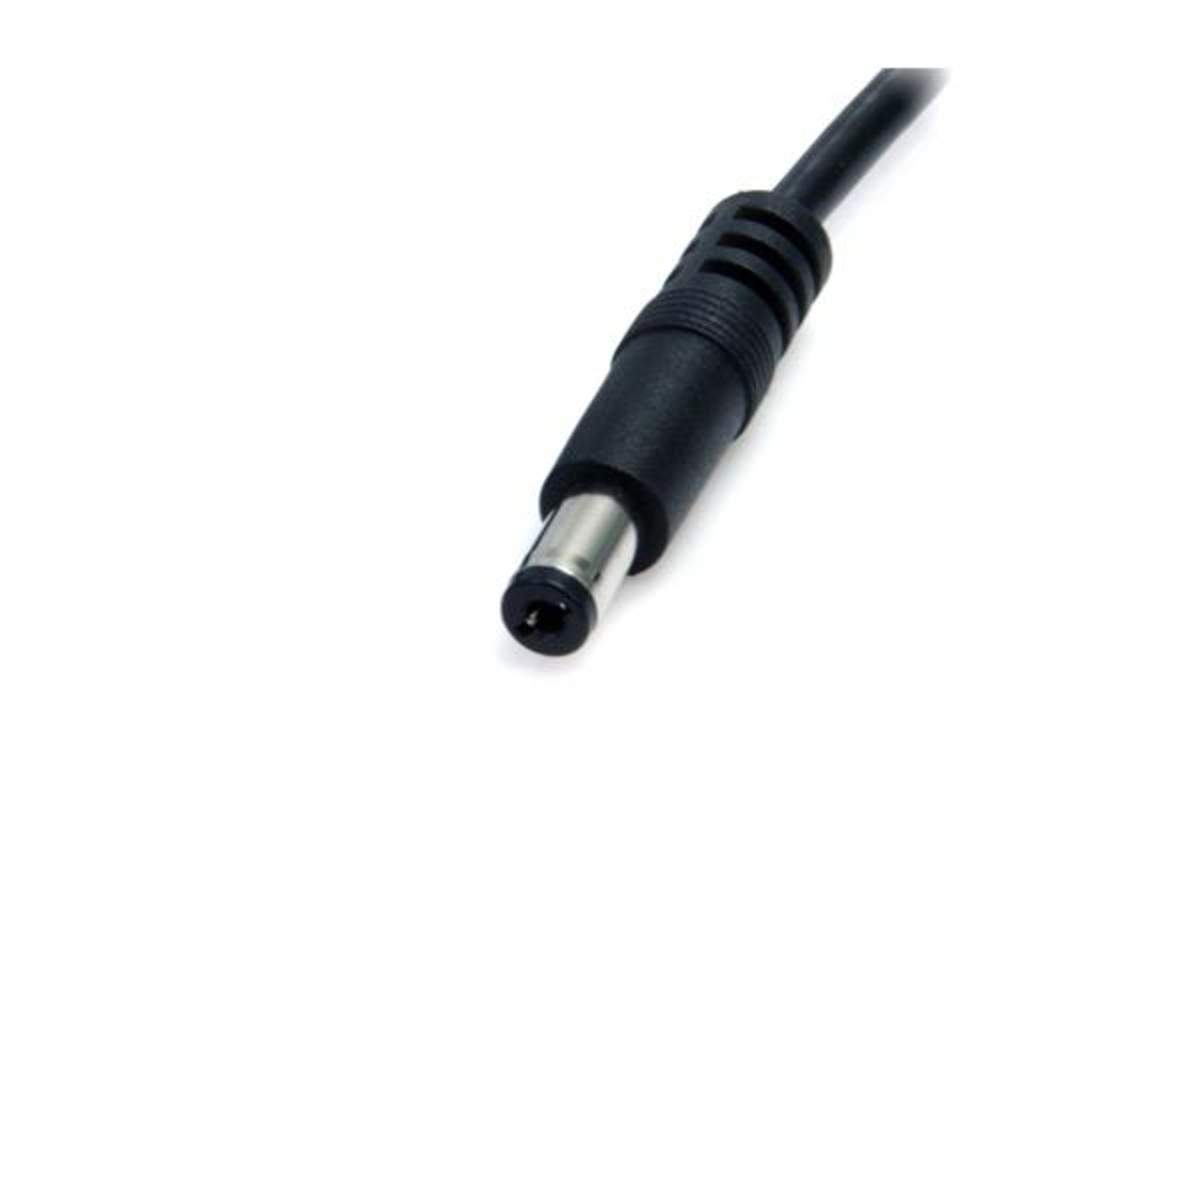 3 ft USB-Type M Barrel 5V DC Power Cable